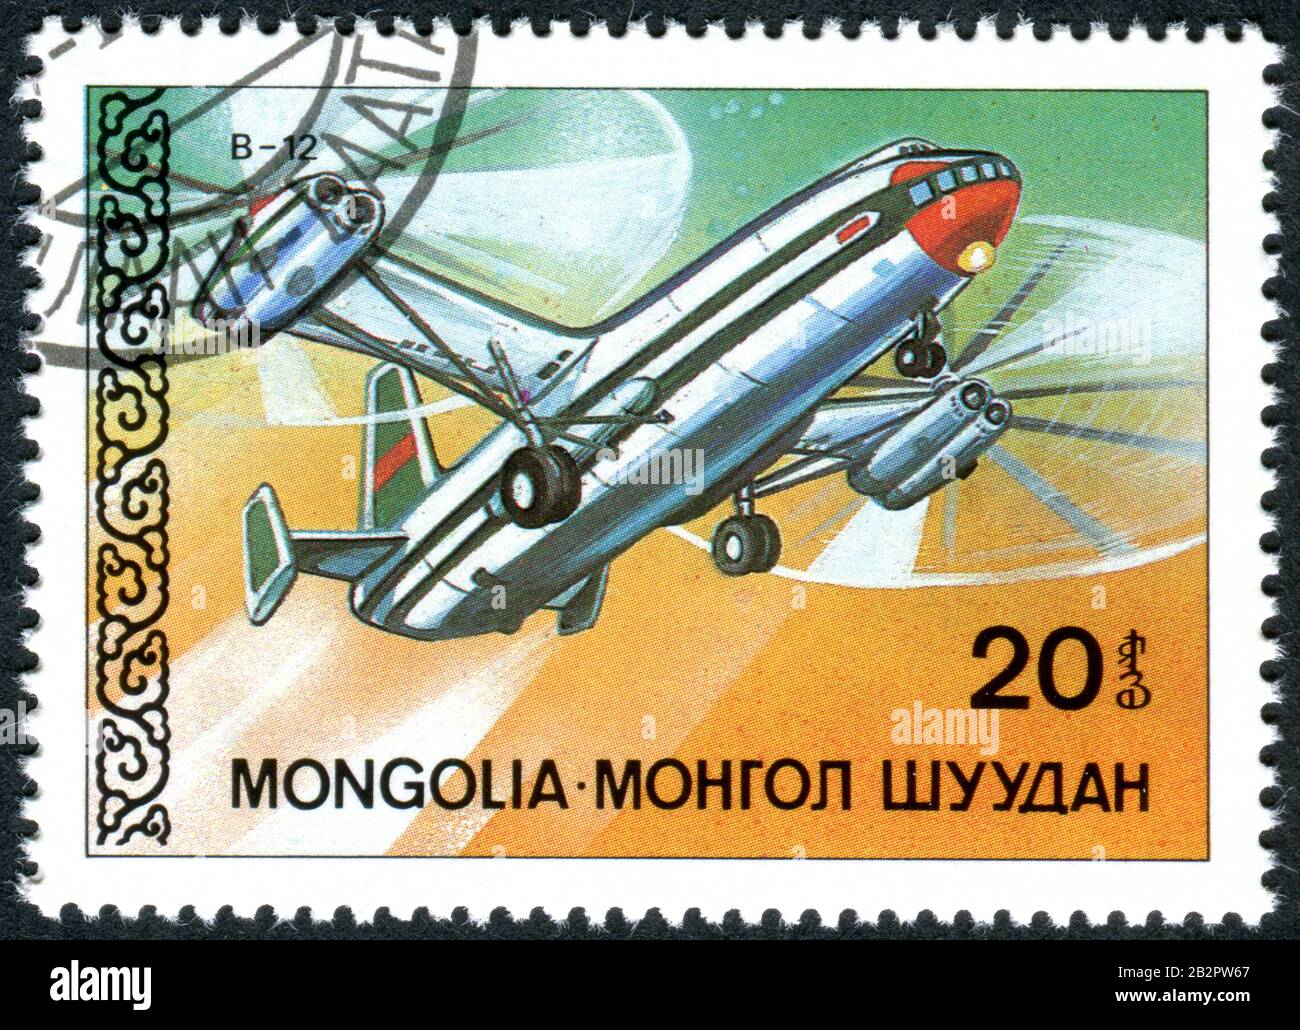 MONGOLIA - CIRCA 1987: A stamp printed in Mongolia, depicted the Soviet heavy lift helicopter Mil V-12 (B-12), circa 1987 Stock Photo